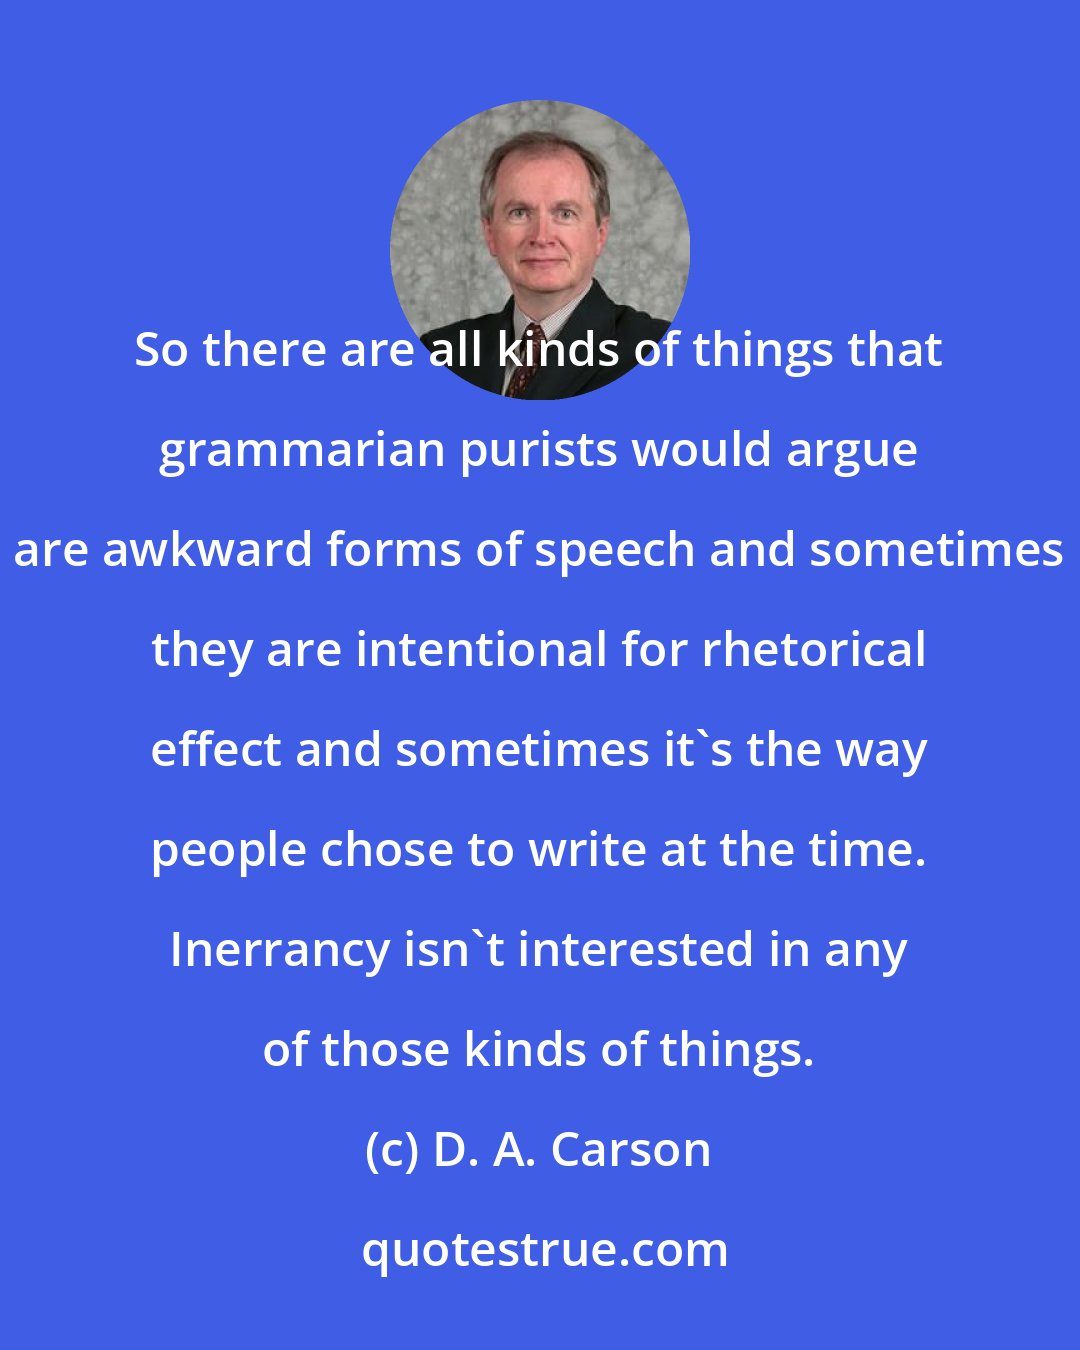 D. A. Carson: So there are all kinds of things that grammarian purists would argue are awkward forms of speech and sometimes they are intentional for rhetorical effect and sometimes it's the way people chose to write at the time. Inerrancy isn't interested in any of those kinds of things.